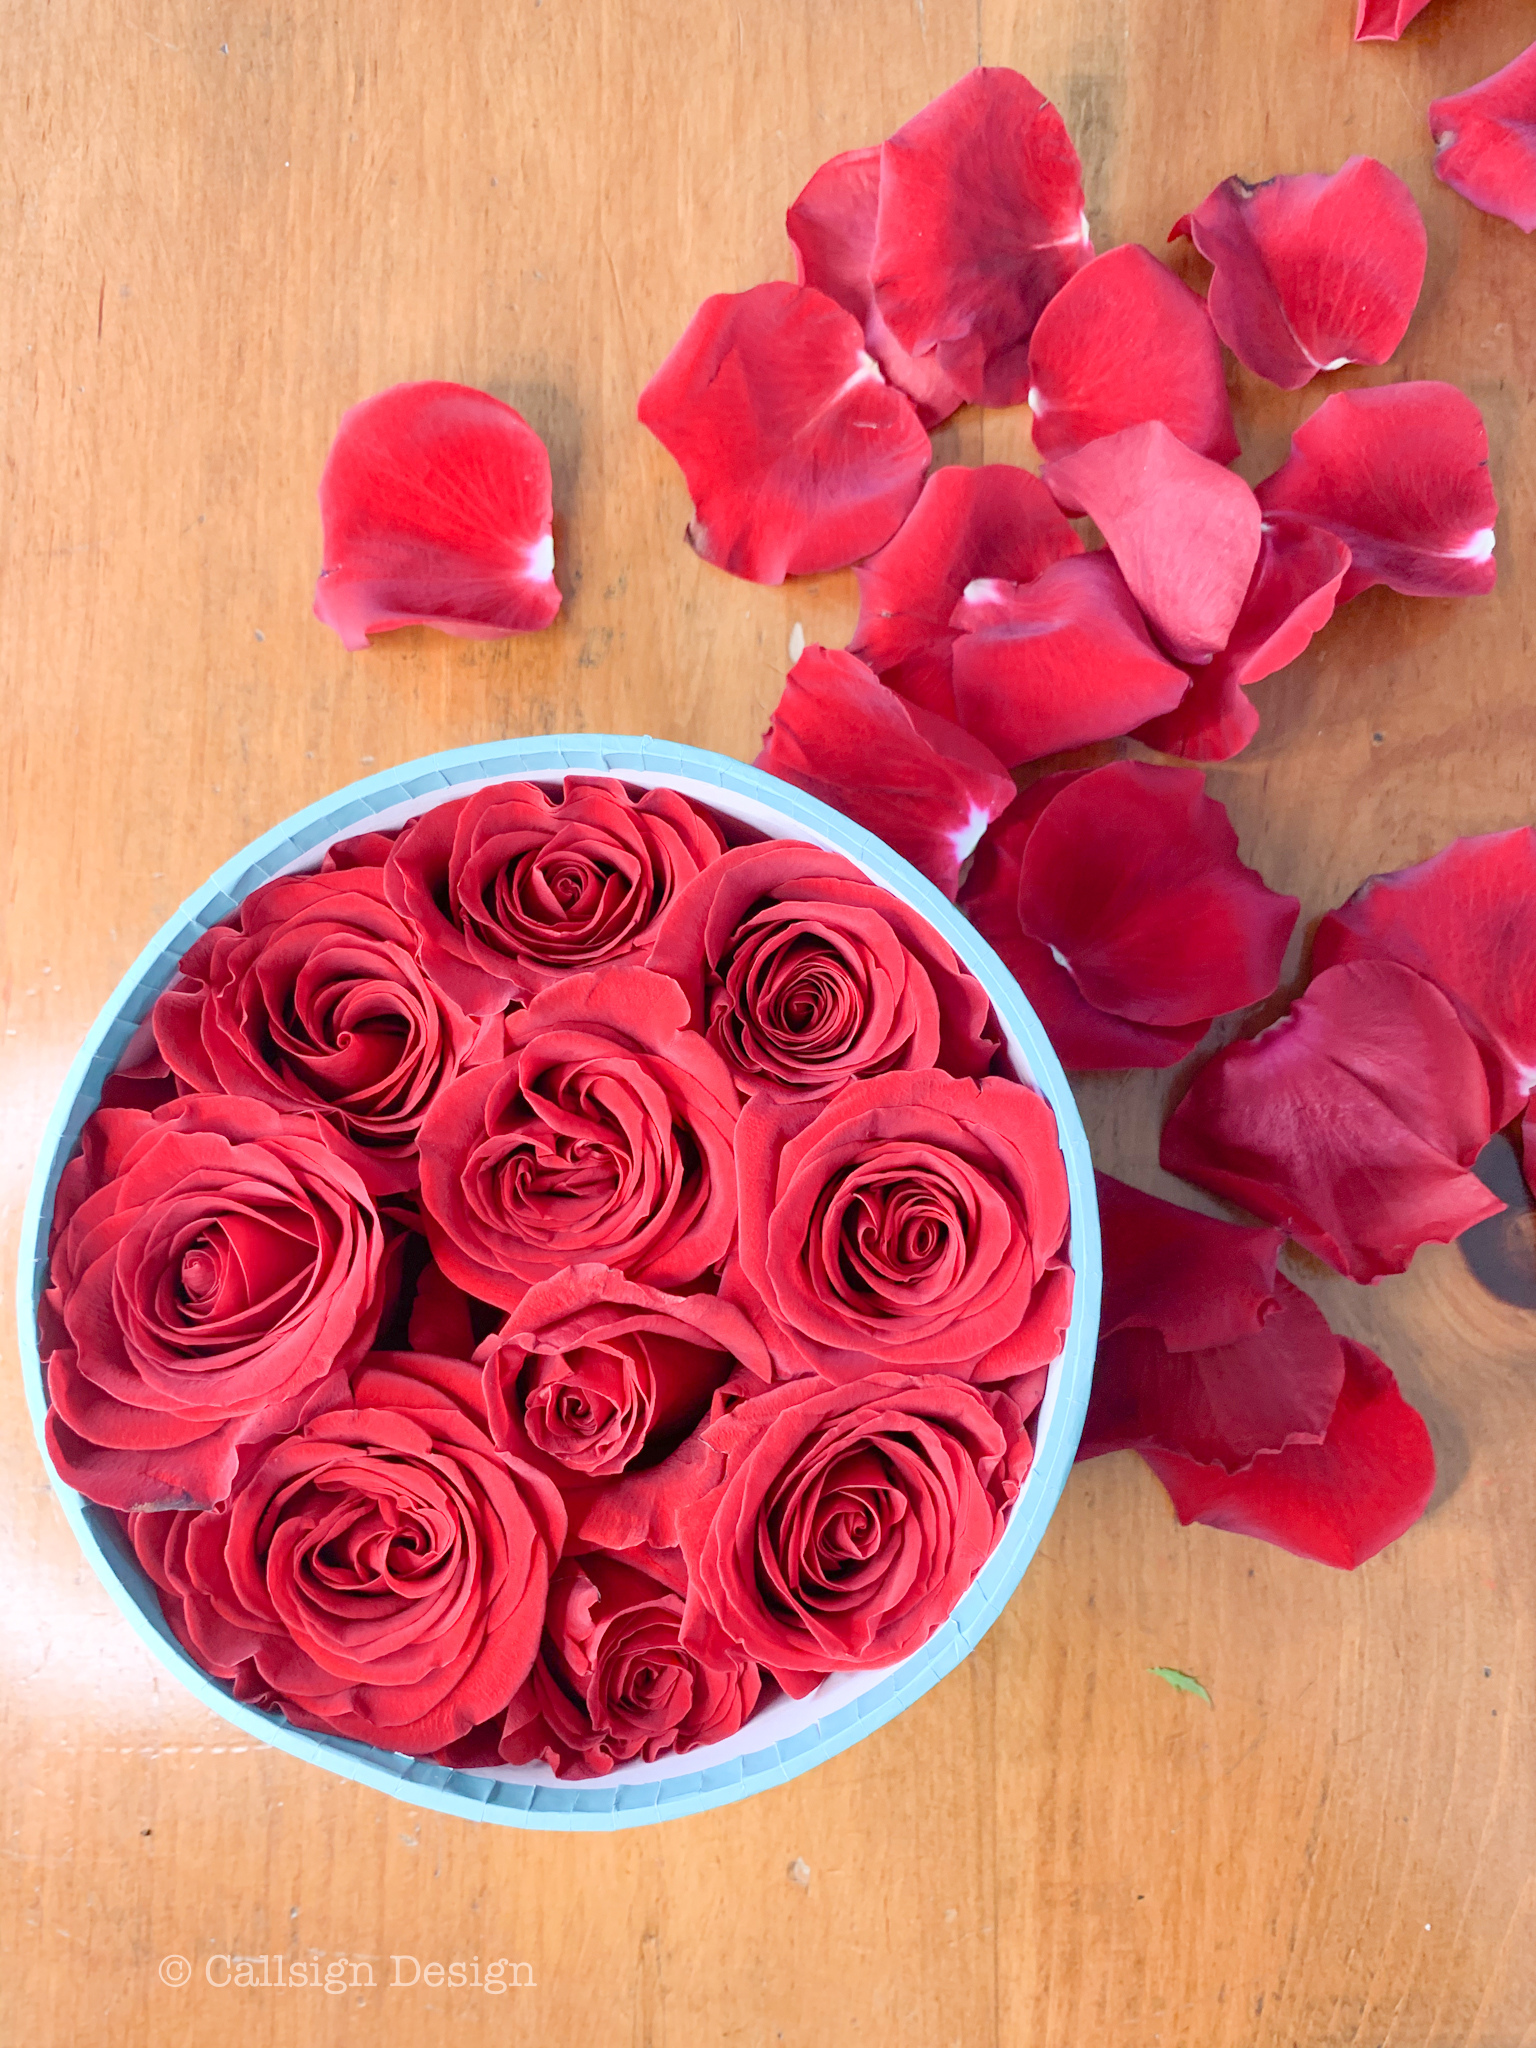 How To Preserve Roses